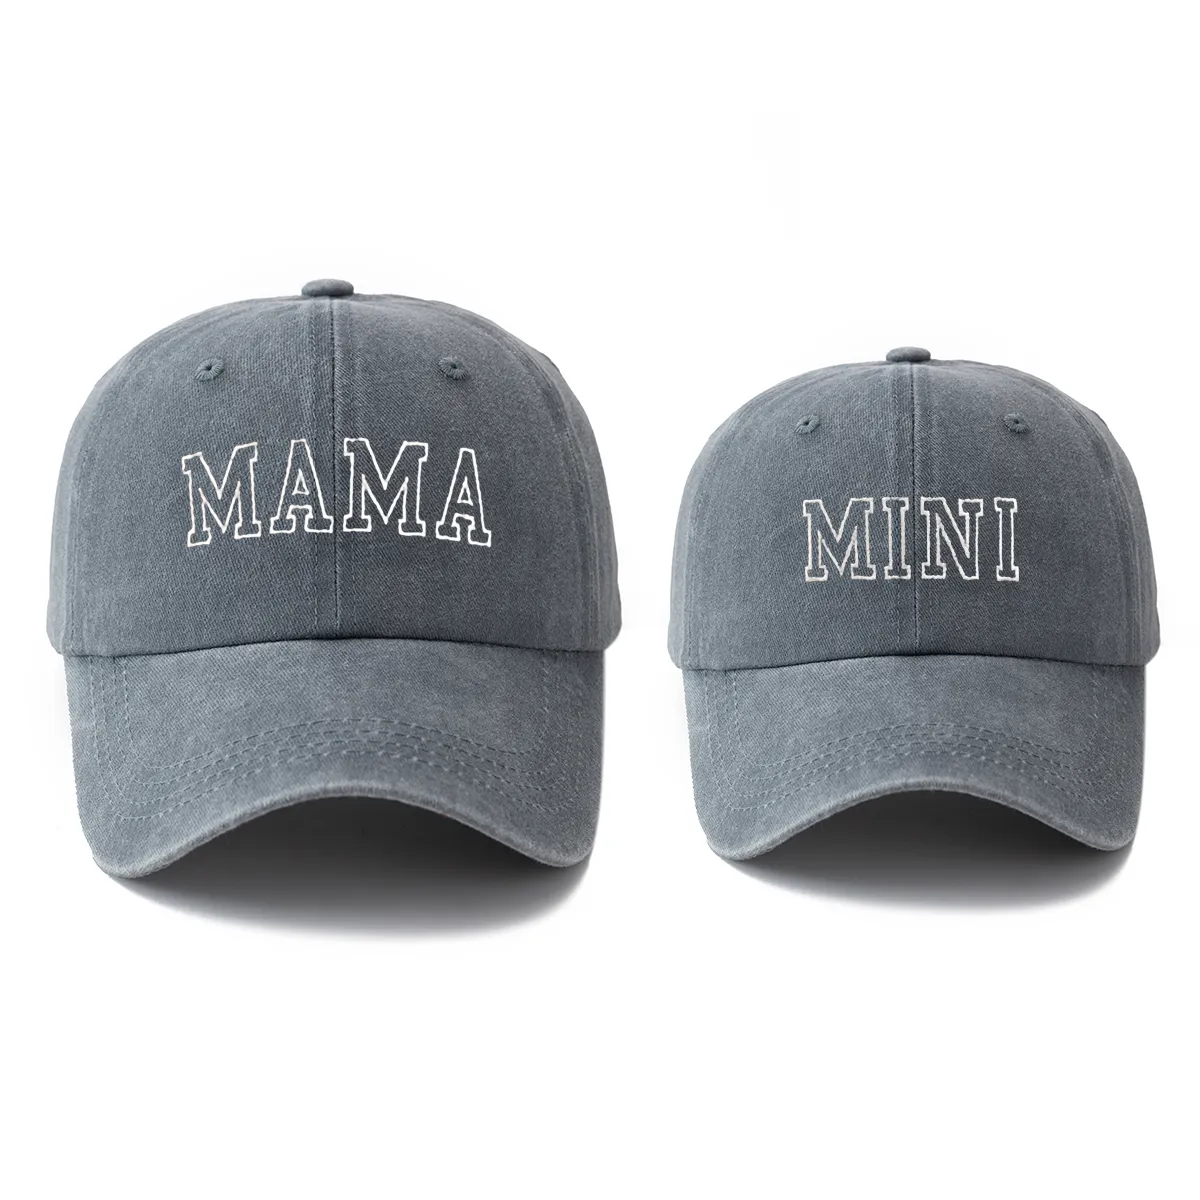 

Family Matching Embroidered Washed Baseball Cap with Alphabet Design